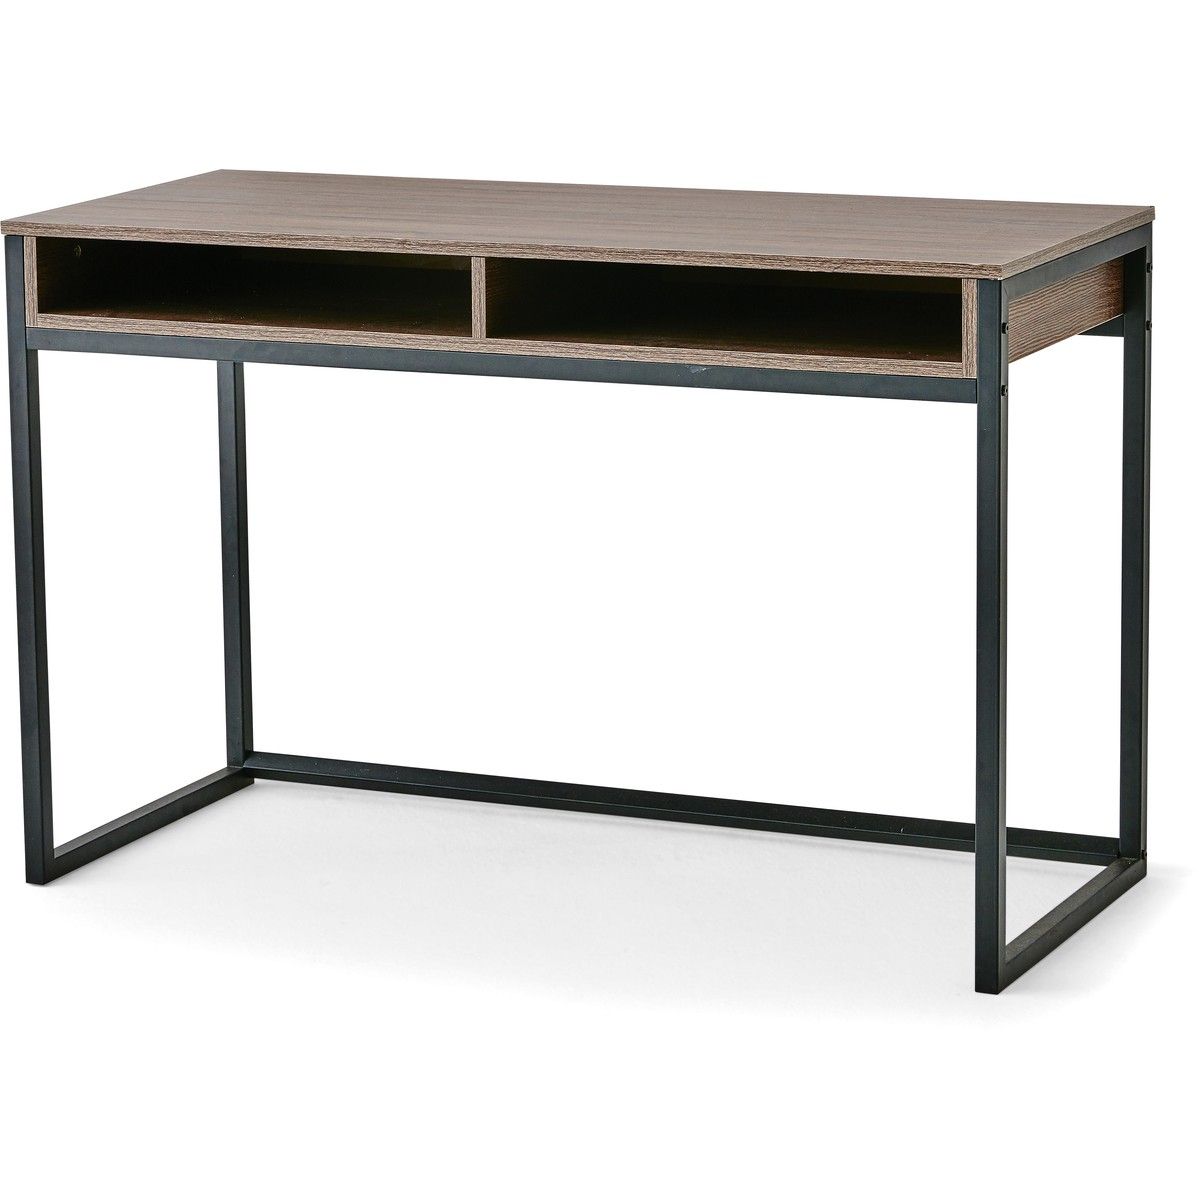 Harvey Dark Brown Oak Desk With Metal Frame | Big W With Large Frosted Glass Aluminum Desks (View 7 of 15)